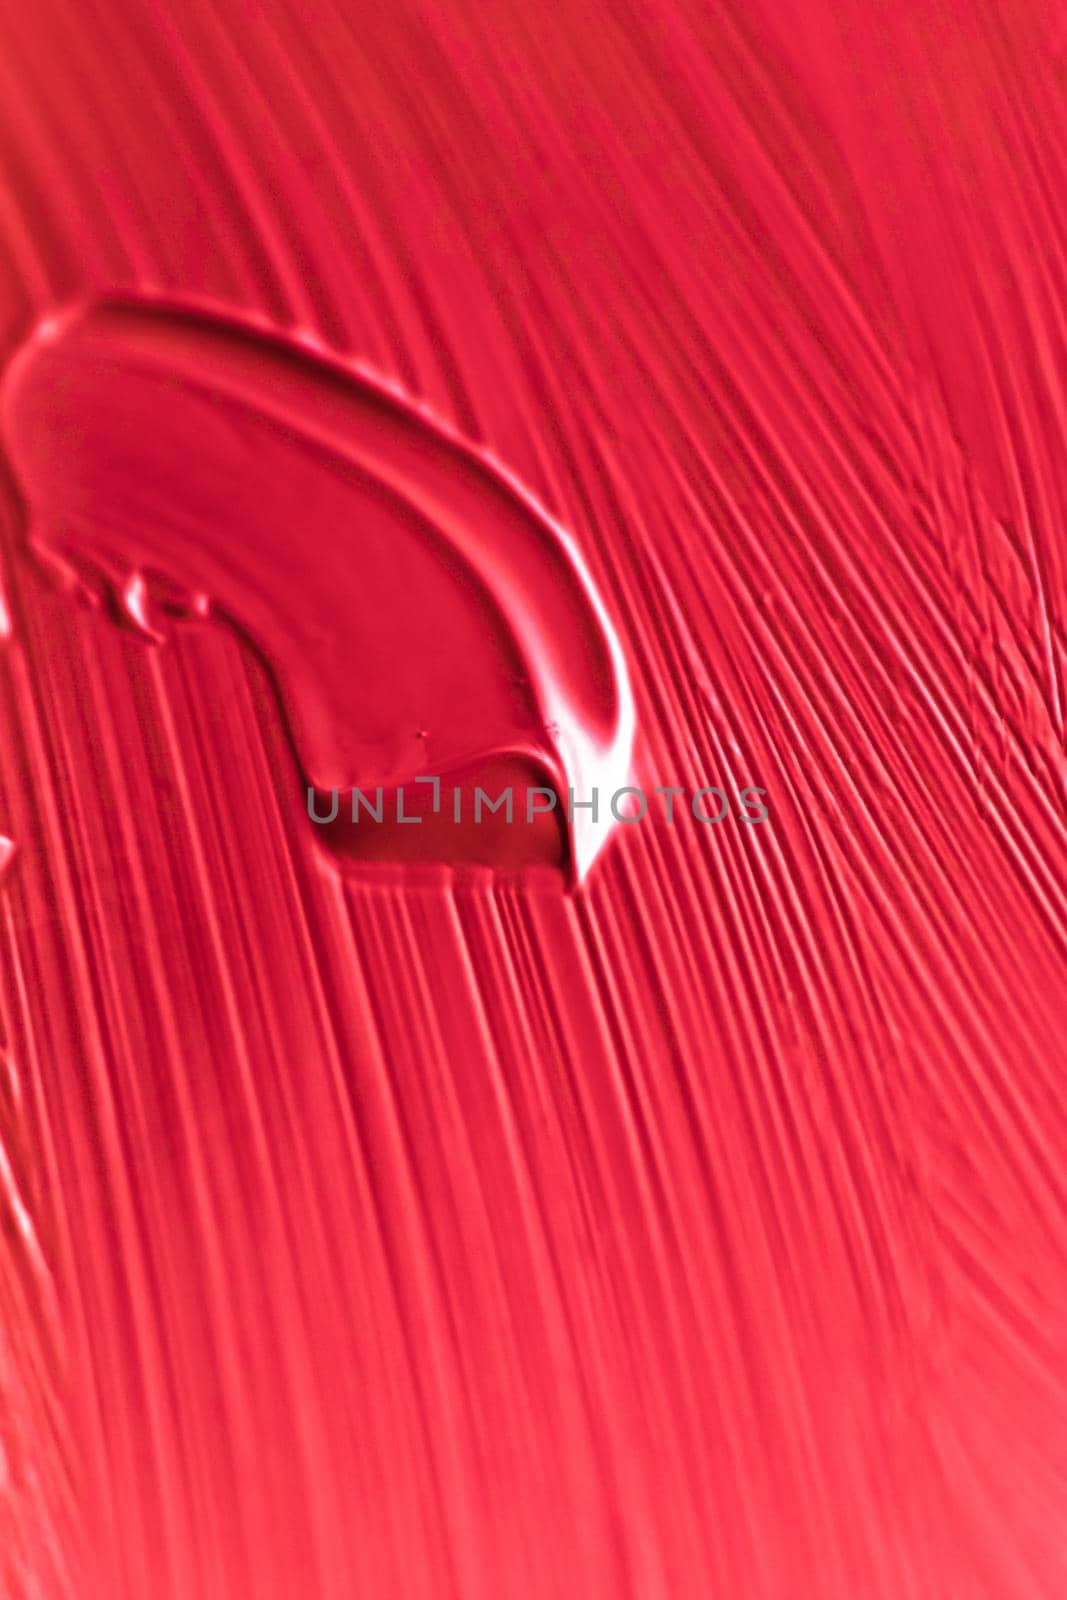 Cosmetics abstract texture background, red acrylic paint brush stroke, textured cream product as make-up backdrop for luxury beauty brand, holiday banner design by Anneleven